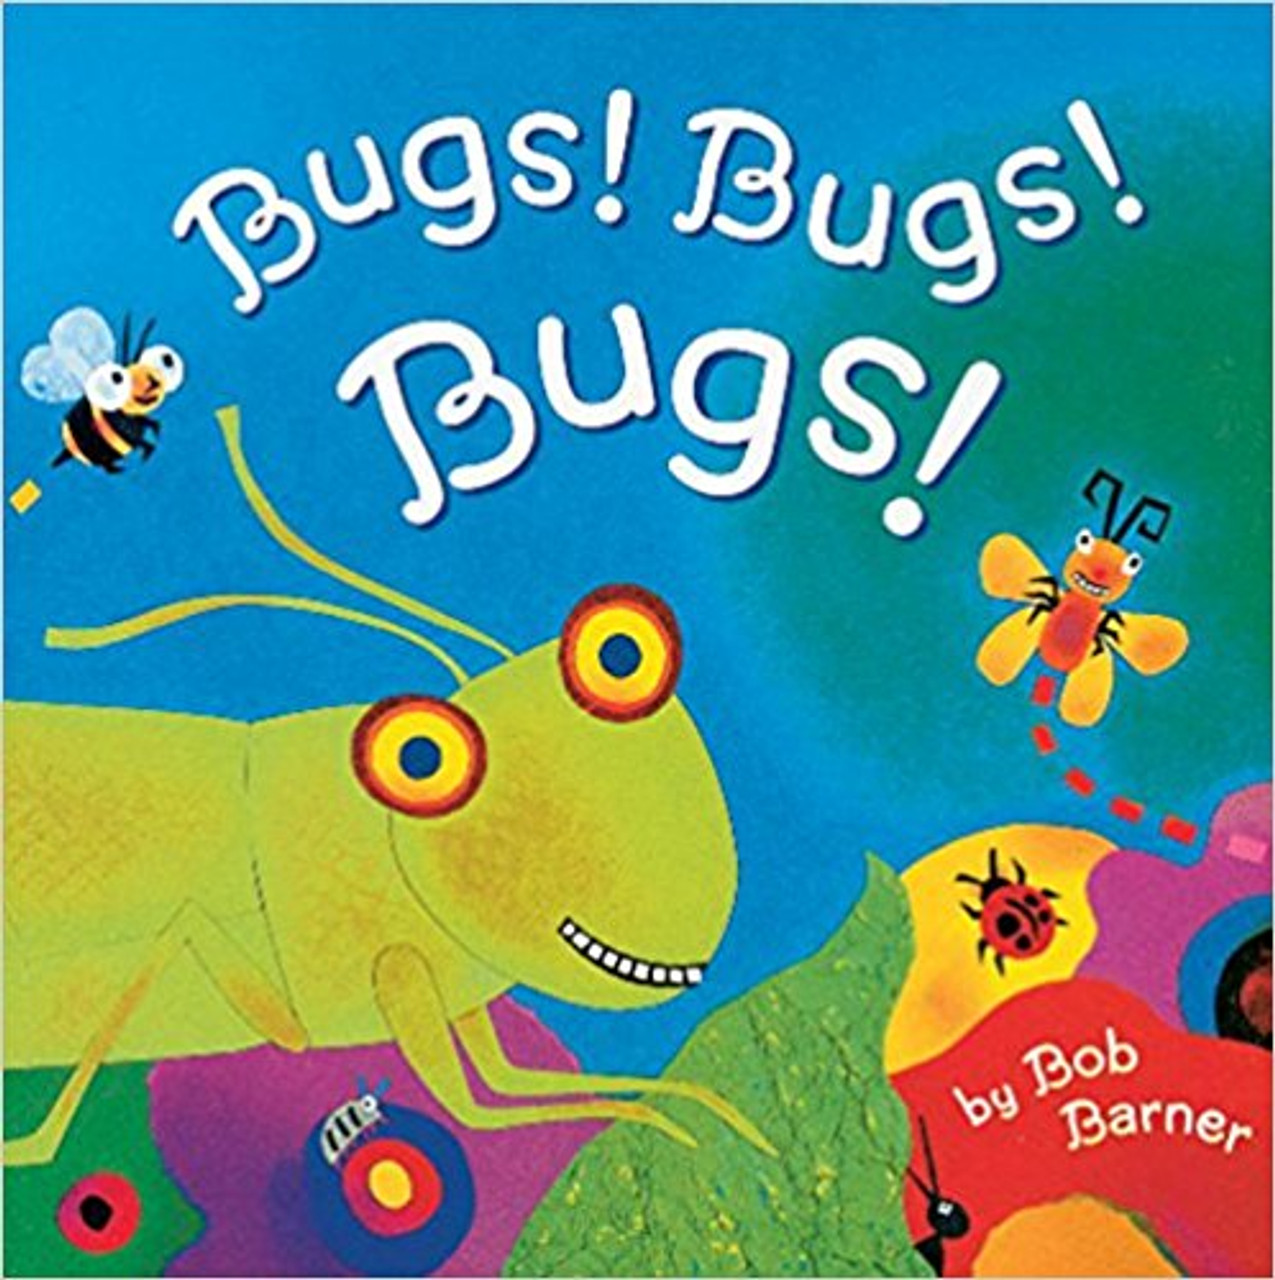 Pretty ladybugs, fluttering butterflies, creepy daddy longlegs, and roly-poly bugs are some of the familiar creatures featured in this whimsically illustrated insect album.  Complete with an "actual size" chart and bug-o-meter listing fun facts about each bug, this book informs and entertains curious little bug lovers everywhere. Full color